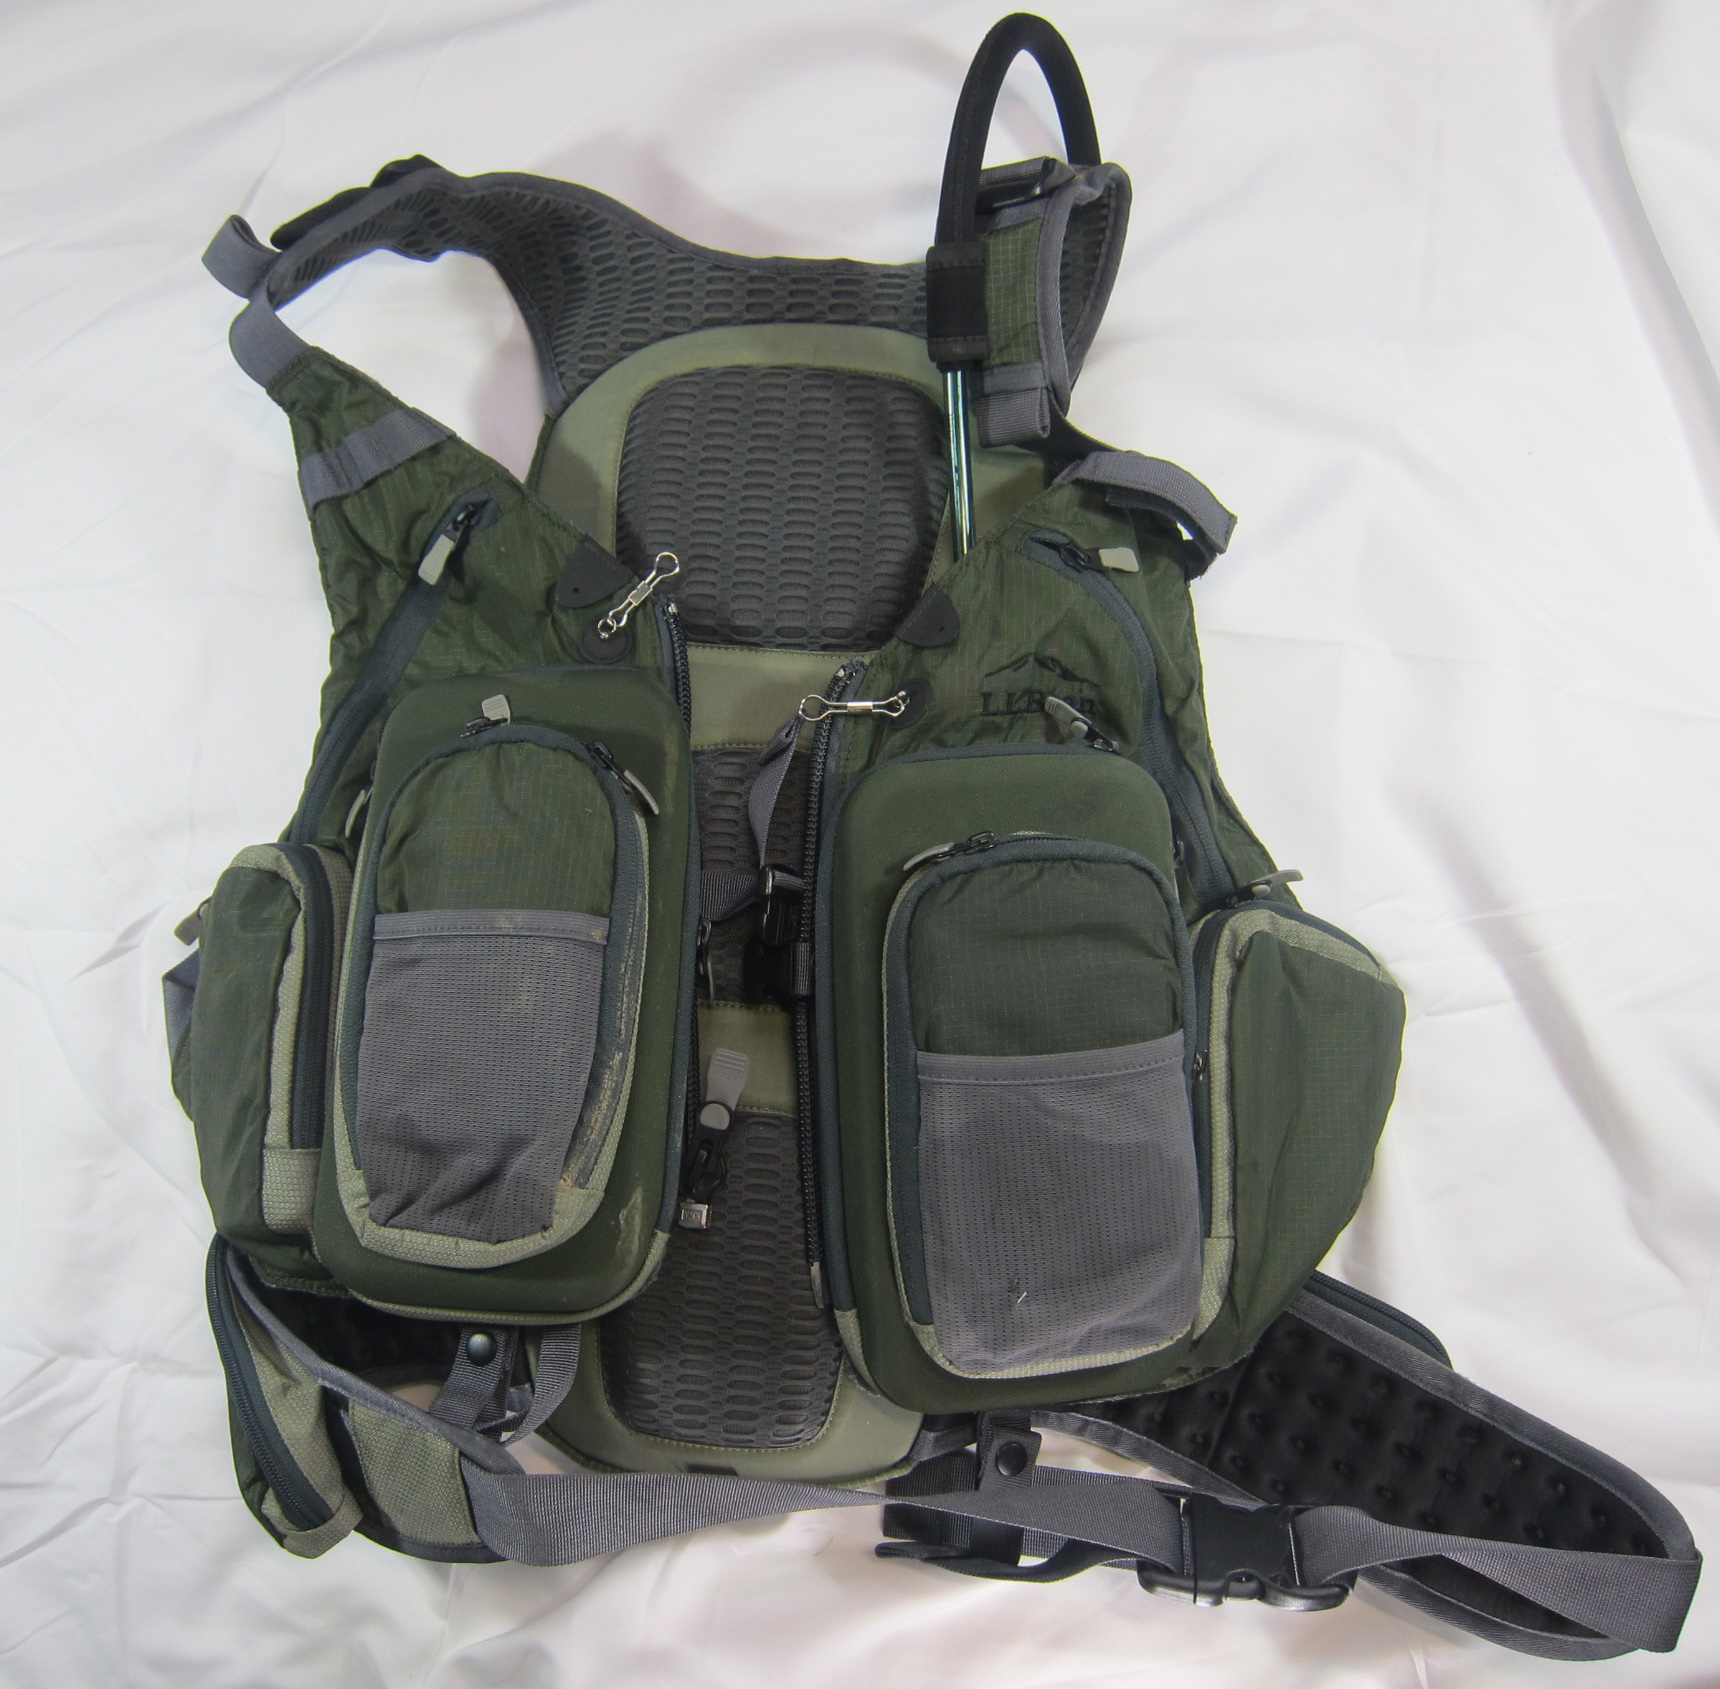 In Reel Time Fishing: Hot Pockets! L.L. Bean Rapid River Fishing Vest Review